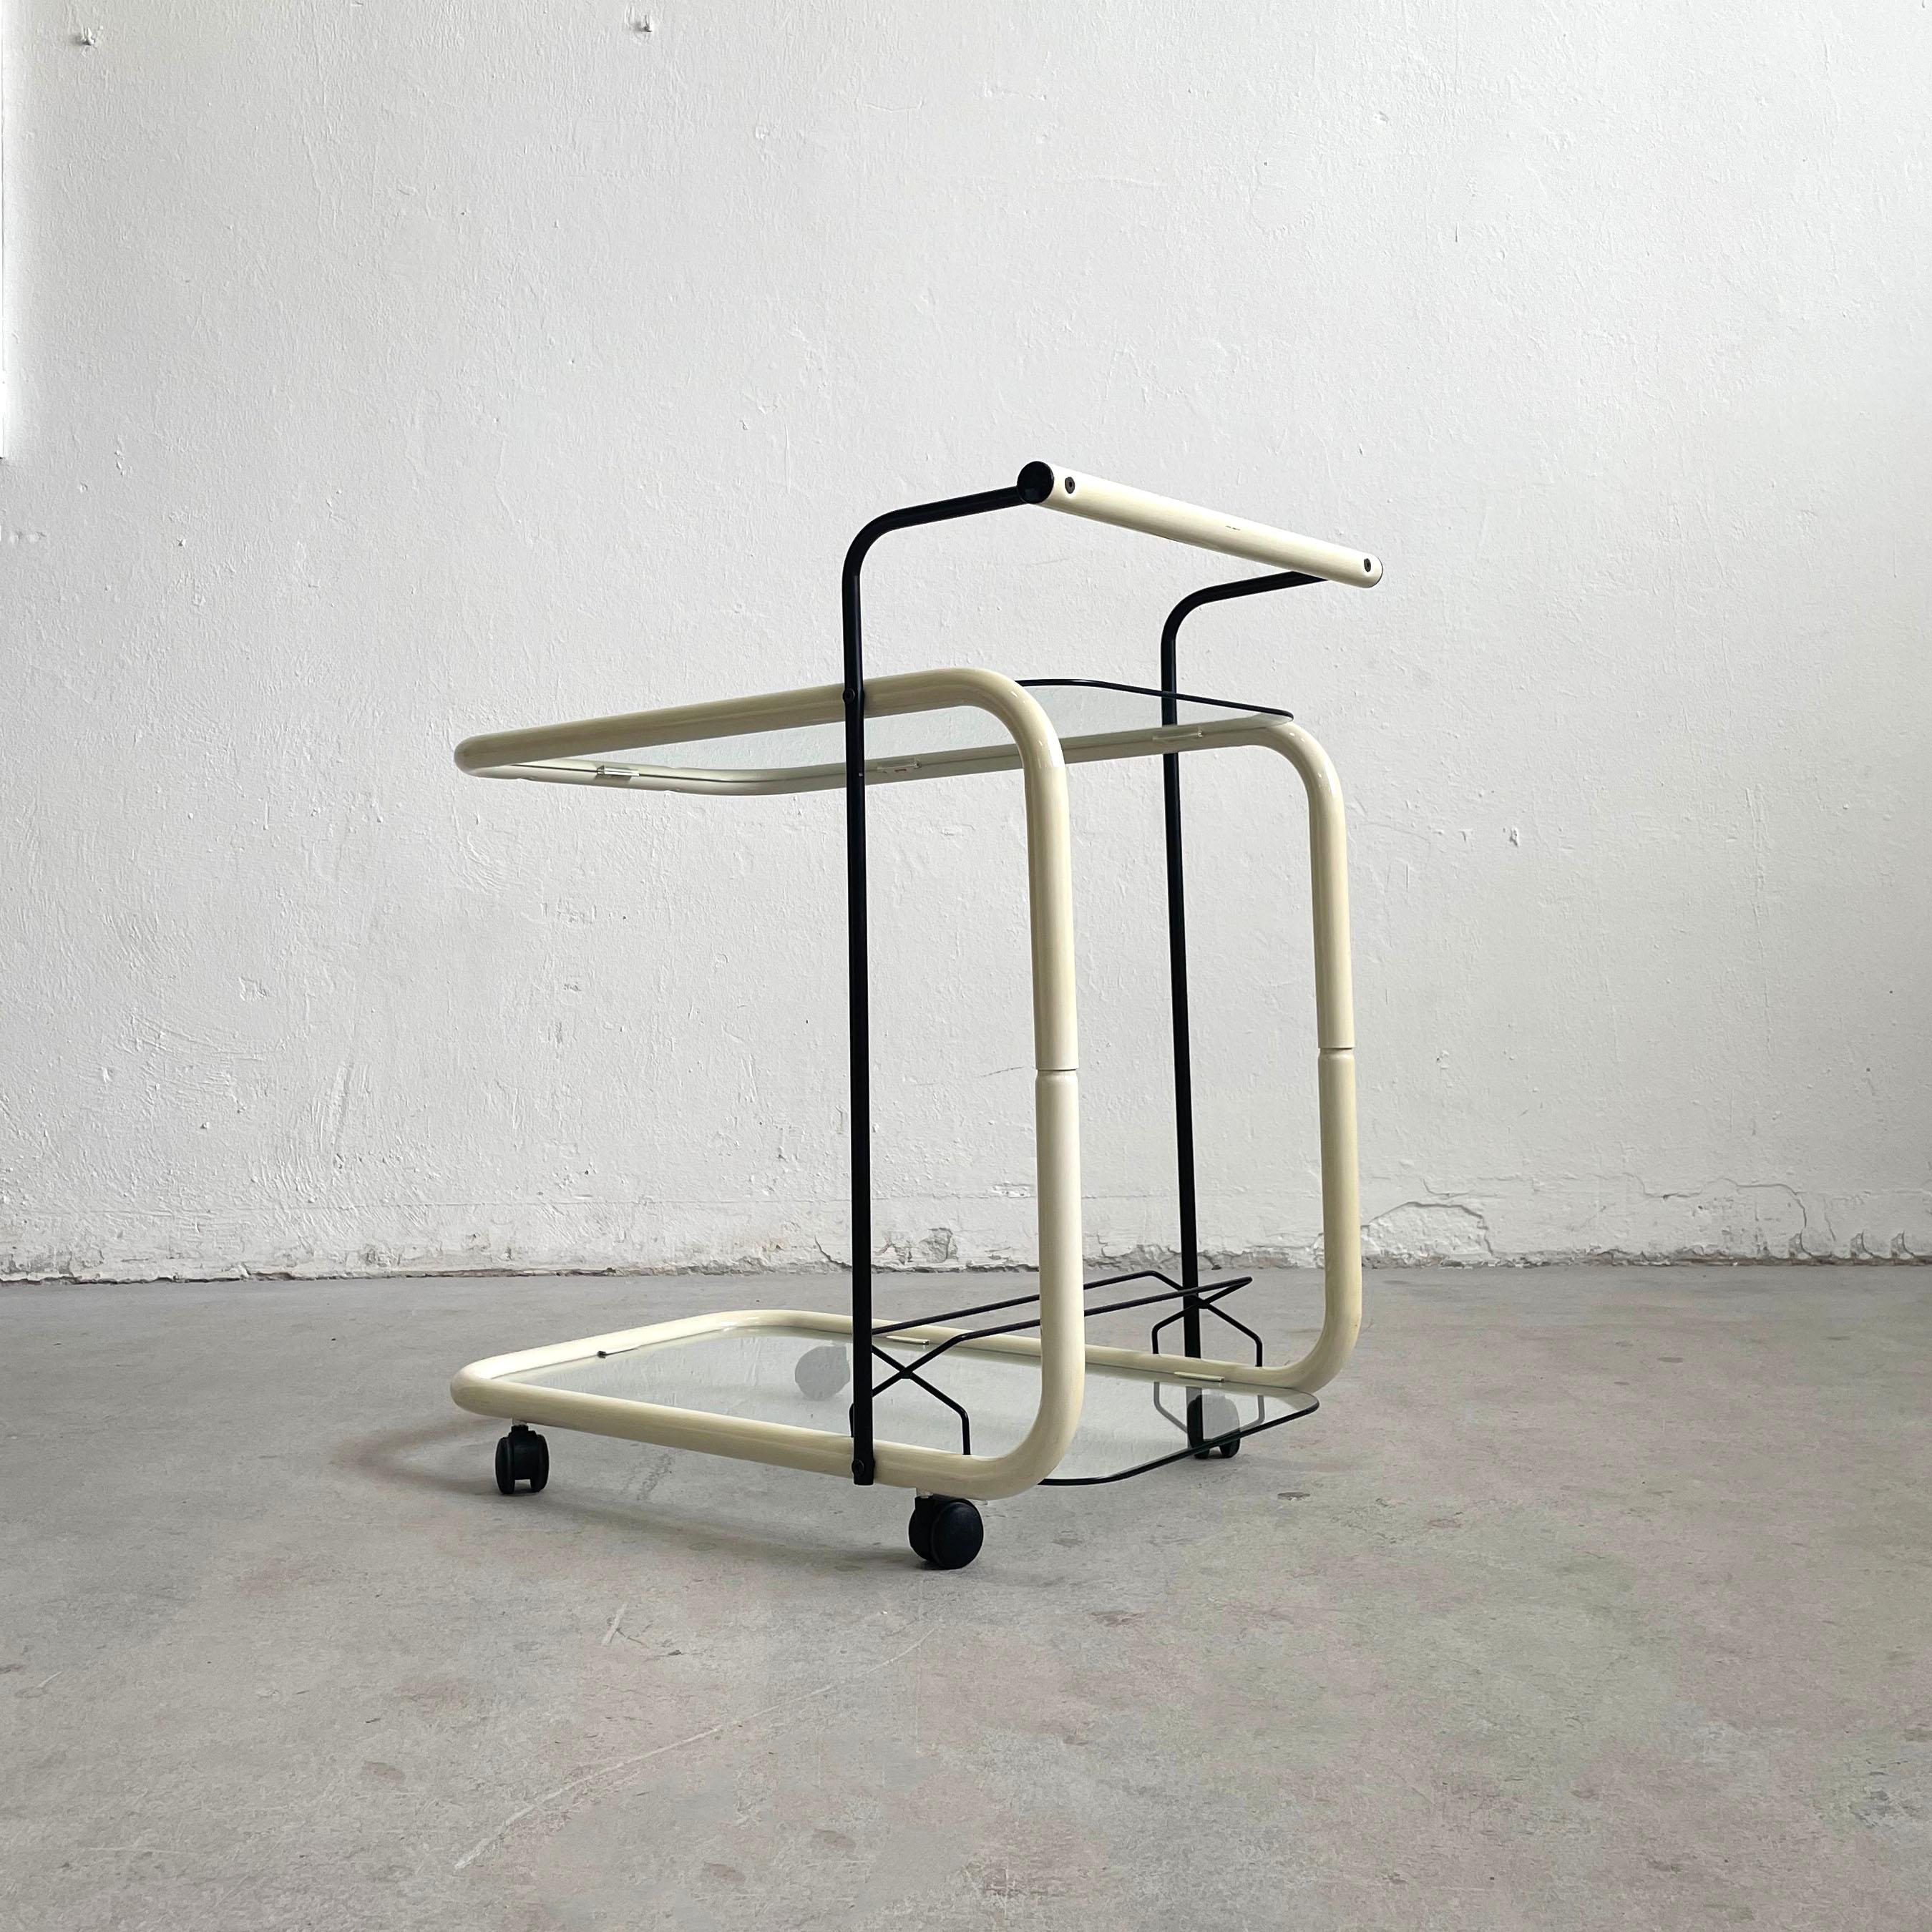 Late 20th Century Vintage Italian Modernist Serving Cart Trolley White Metal and Glass, Italy 1970